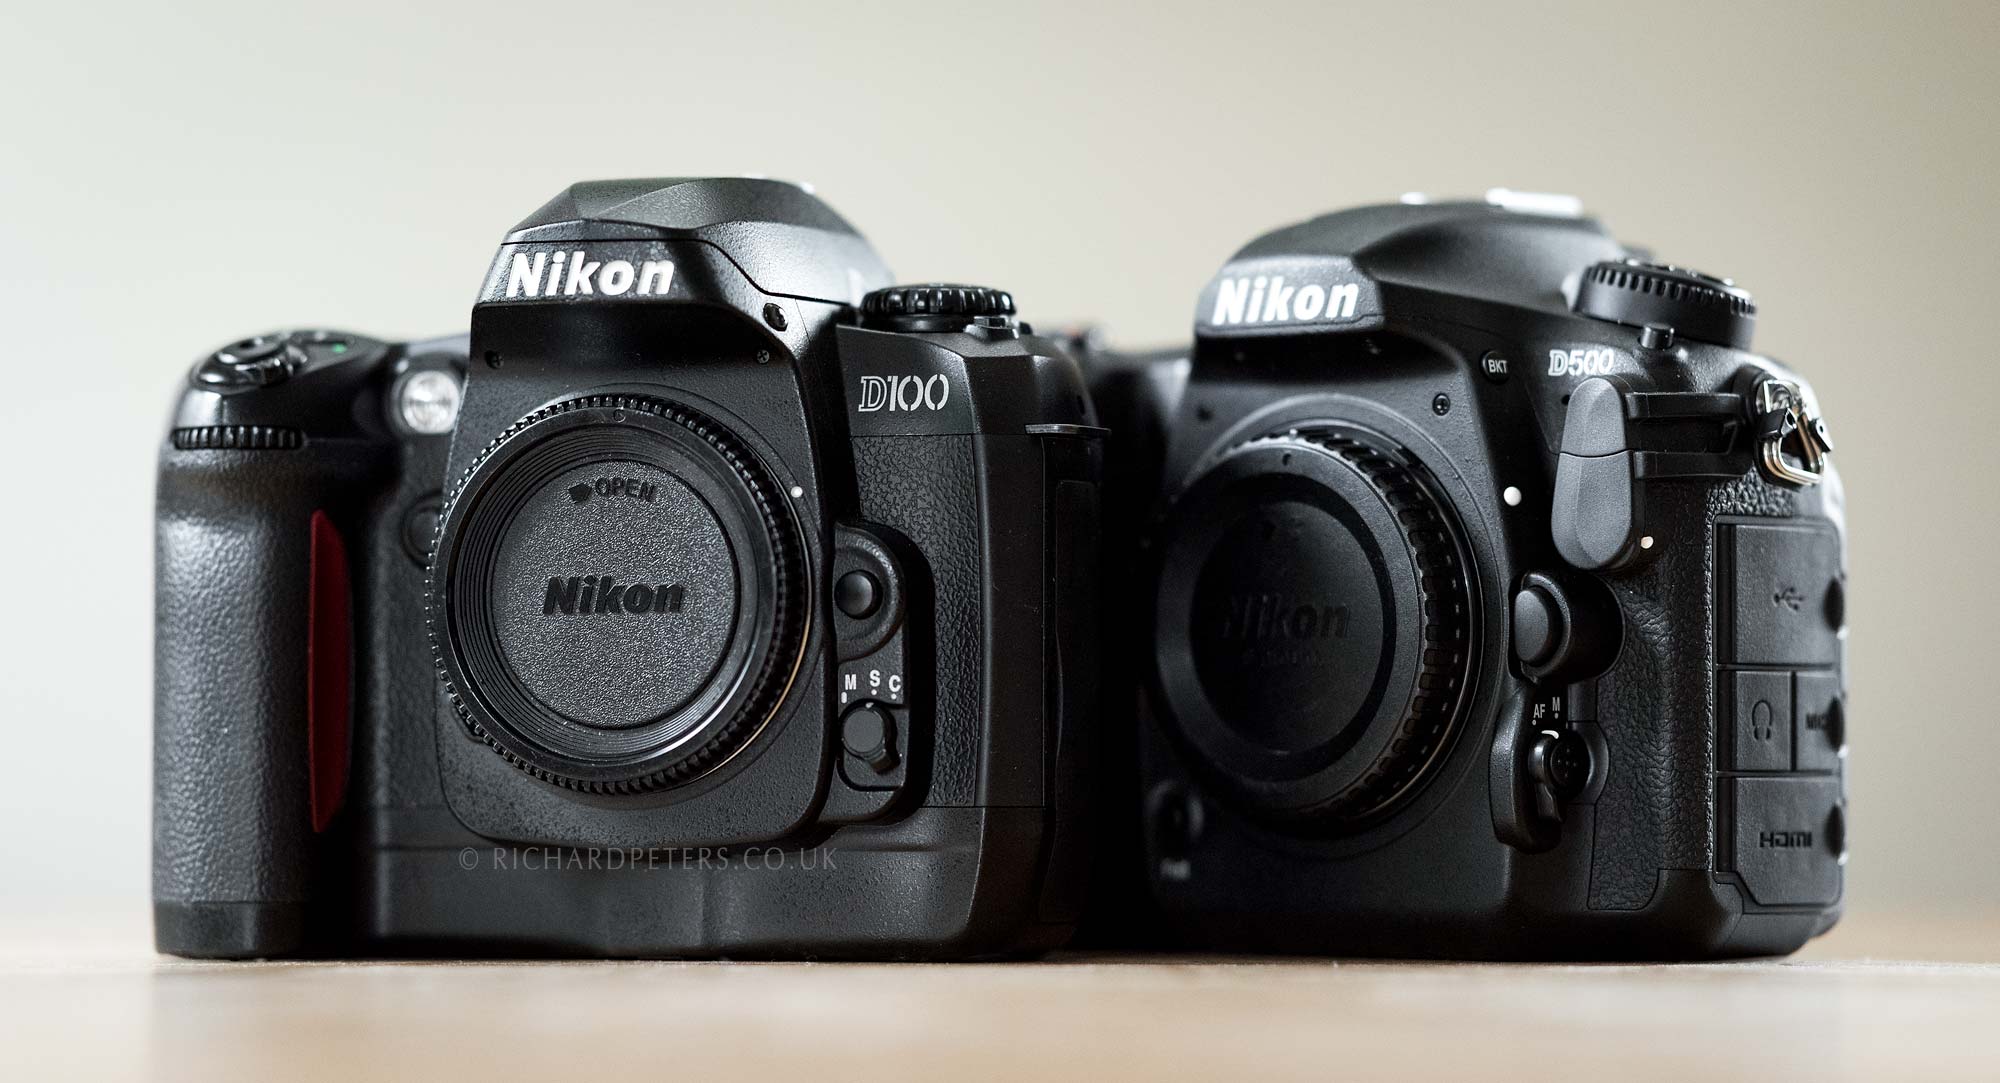 The Nikon D100 and D500